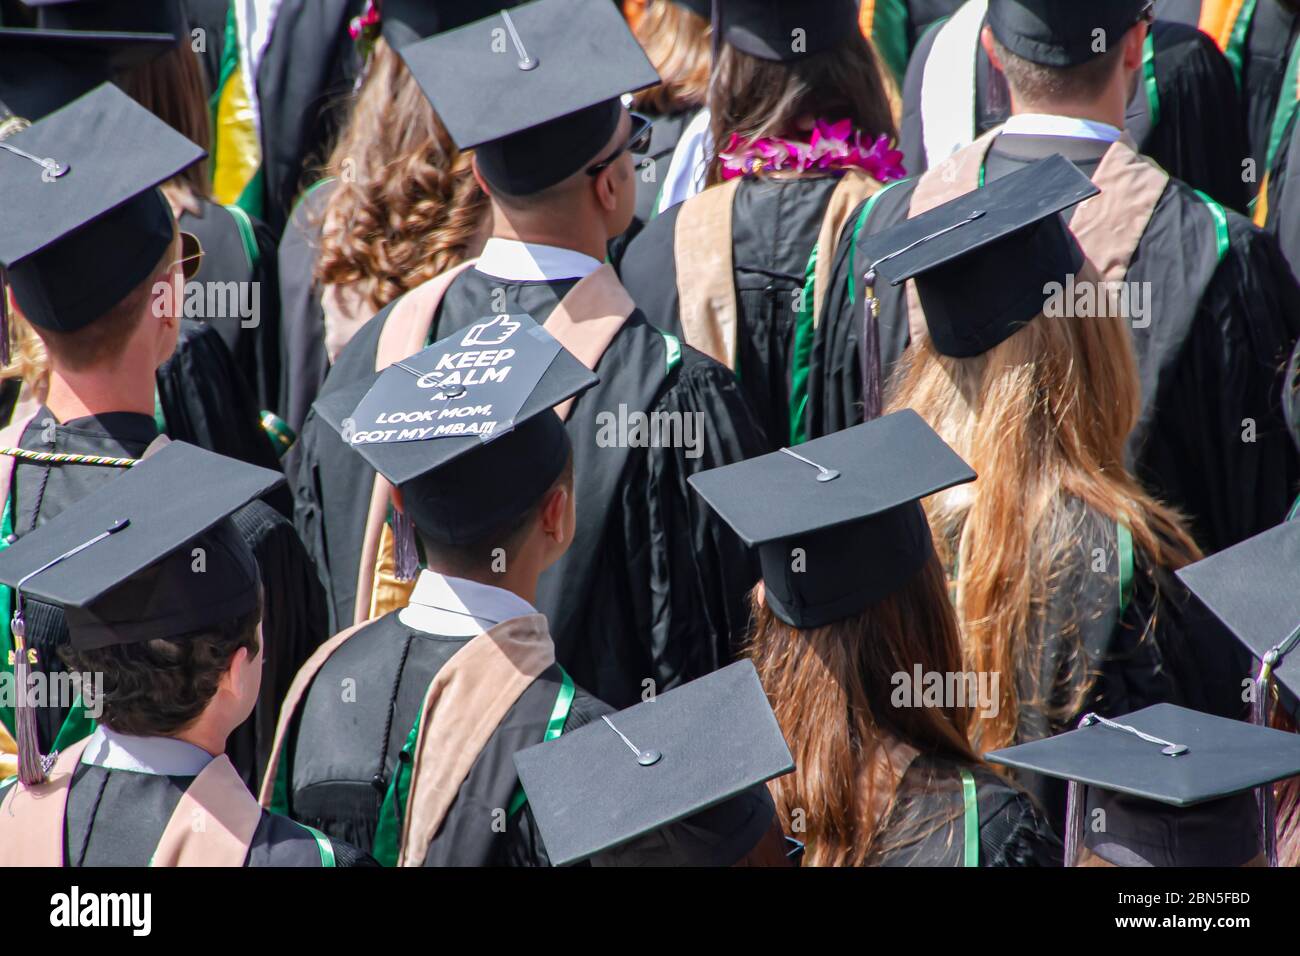 MBA graduation ceremony with cap and gown and a sign Stock Photo